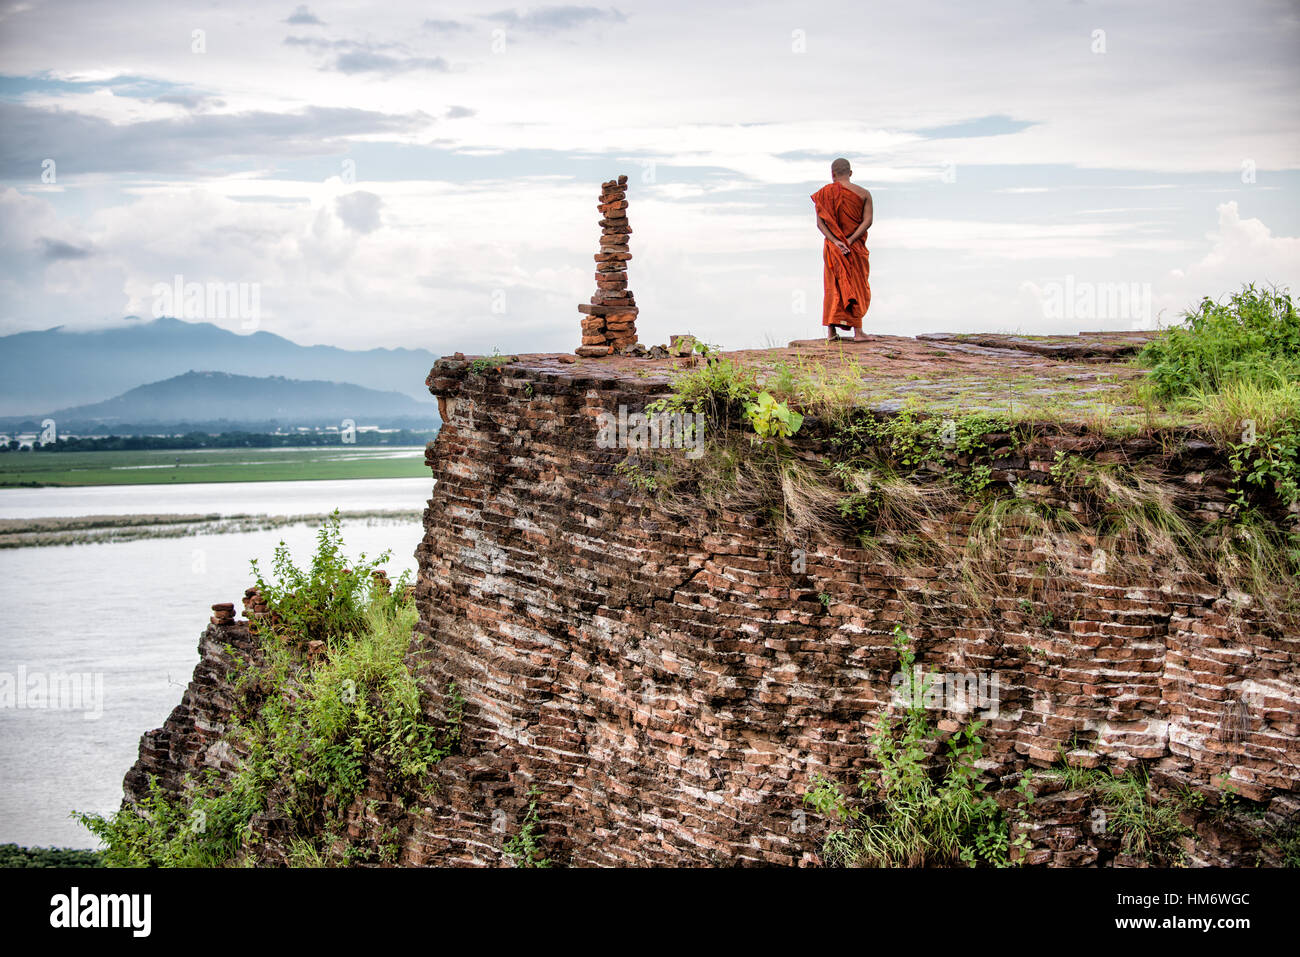 MINGUN, Myanmar - A Buddhist monk gazes out over the view of the Ayeyarwaddy River from the top of the Unfinished Pagoda in Mingun. Mingun Pahtodawgyi, also known as the Unfinished Pagoda of Mingun, was commissioned by King Bodawpaya in 1790. The current structure stands 50 meters tall; the plans called for it to reach a total height of 150 meters when completed. The structure is solid and built entirely of bricks. An earthquaker in March 1839 tore large cracks in the structure. Stock Photo